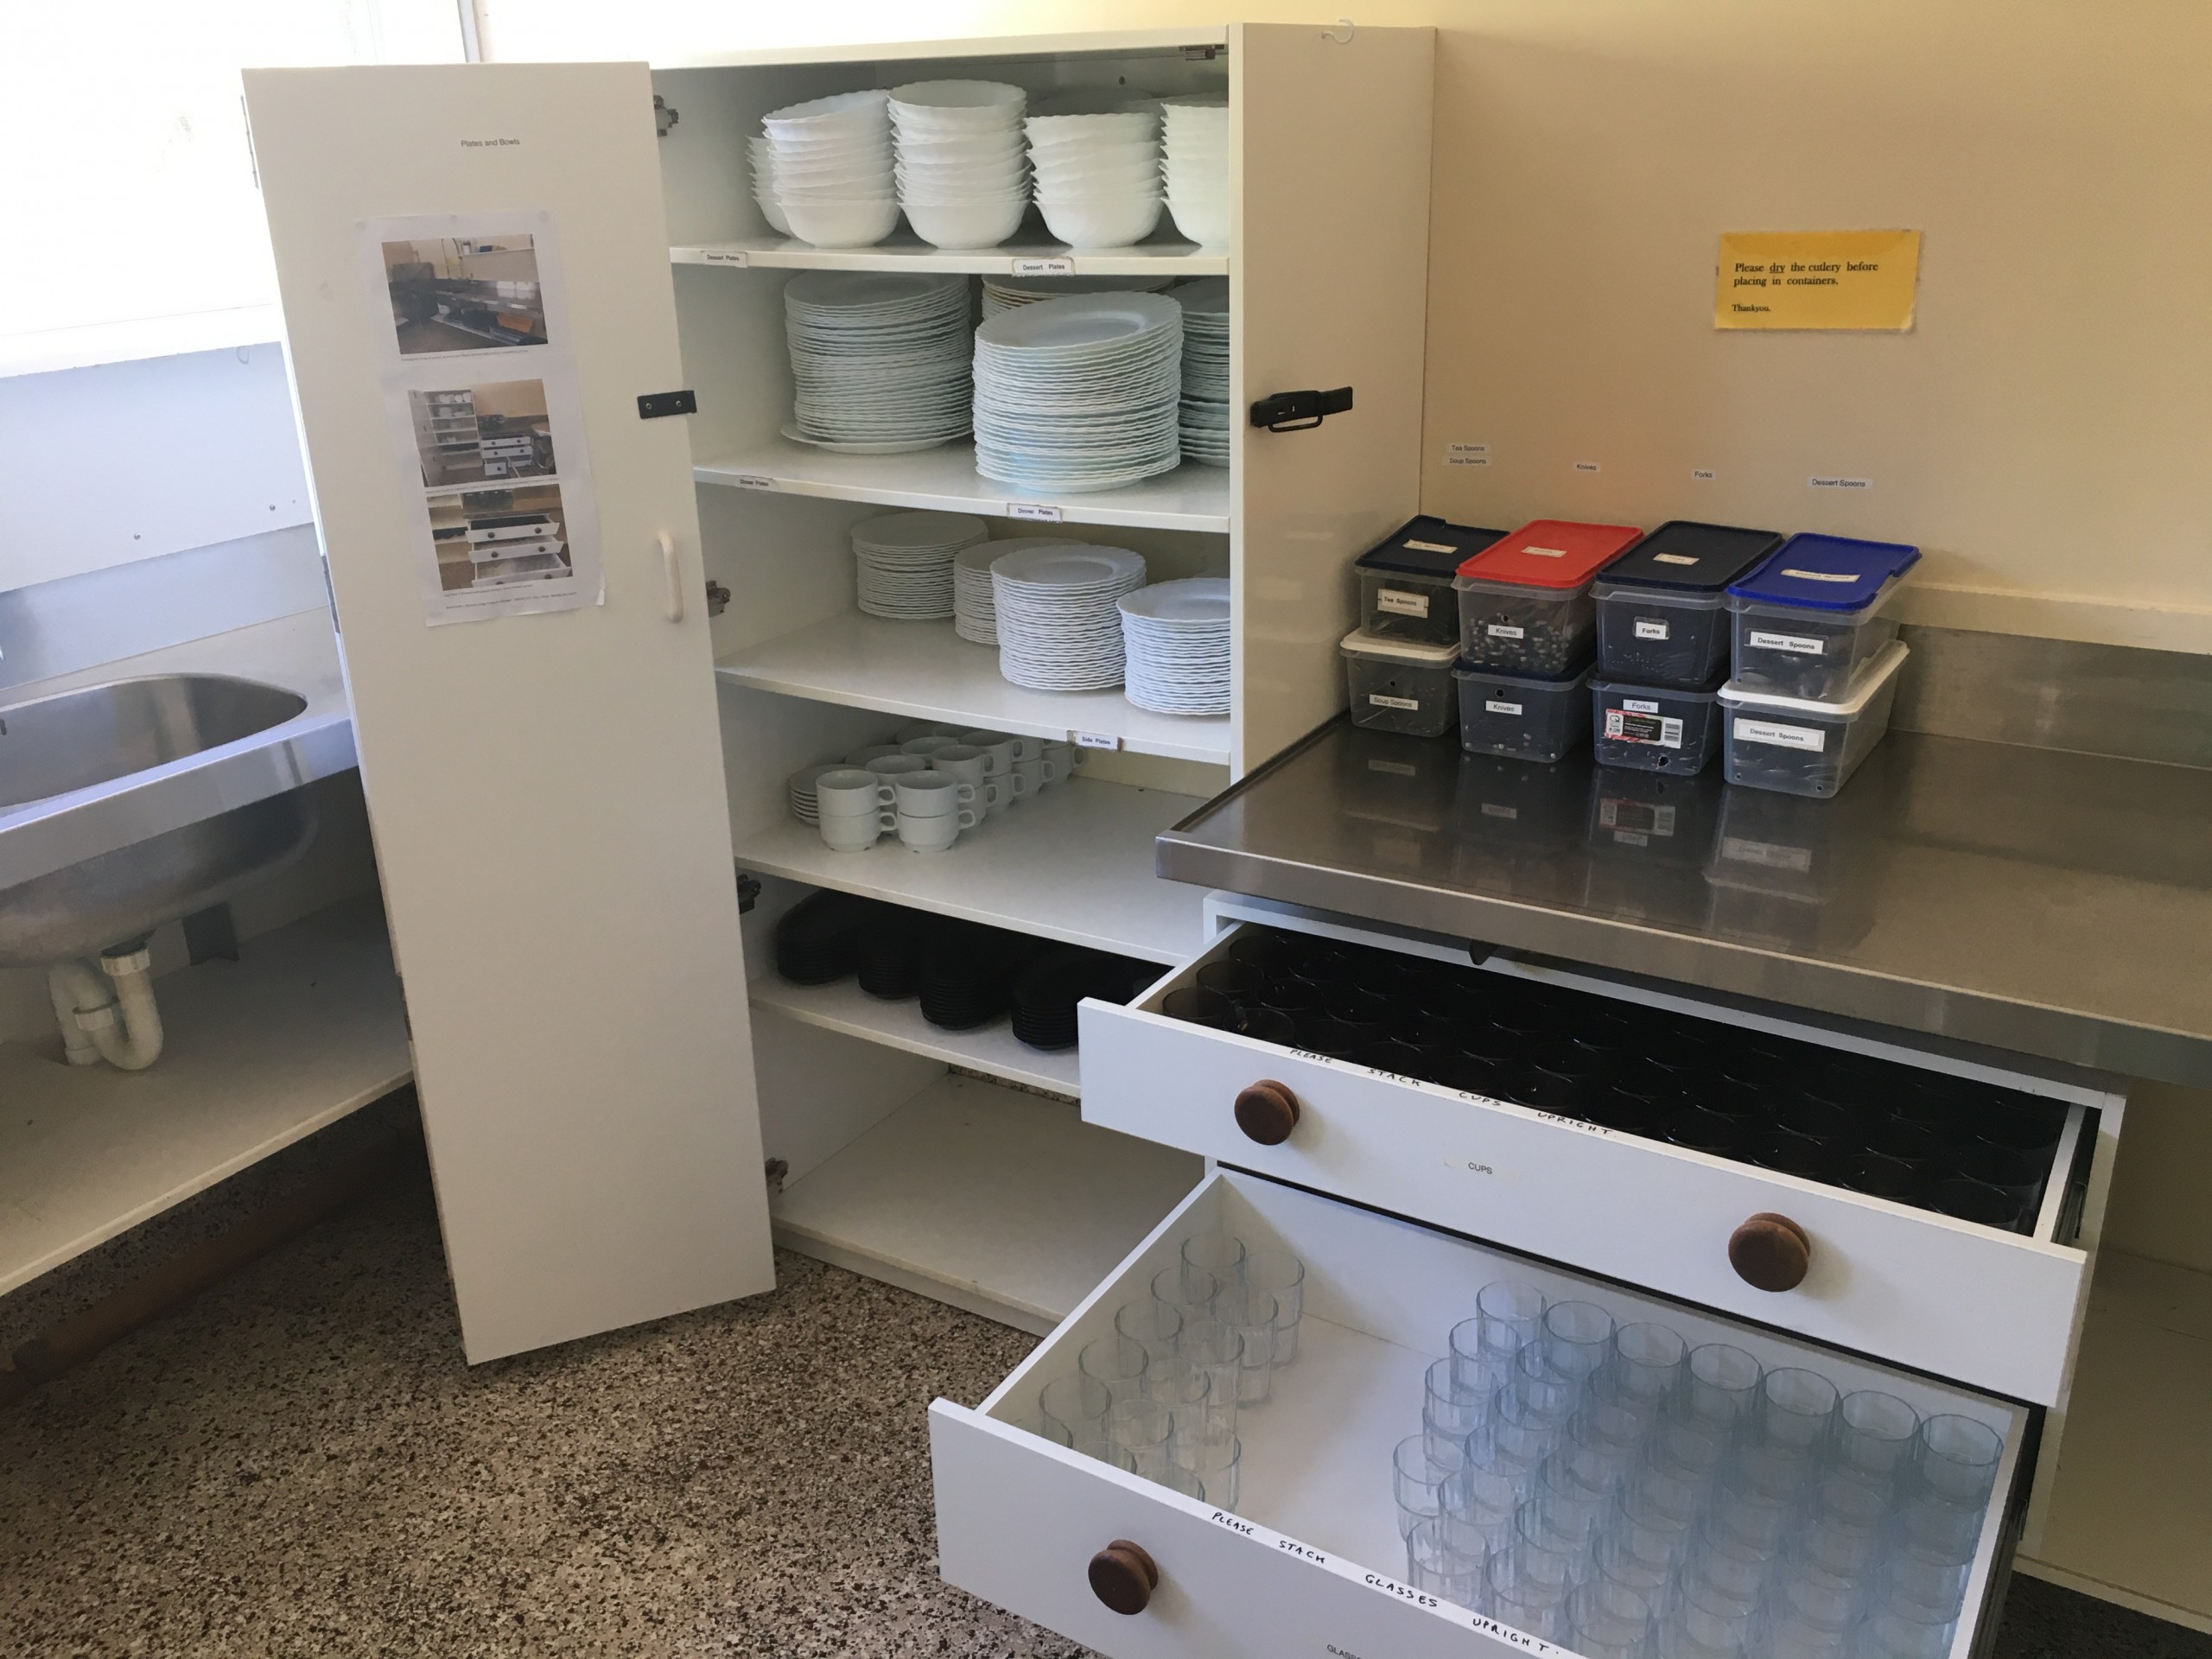 Plates, bowls, glasses, cups and cutlery in the scullery